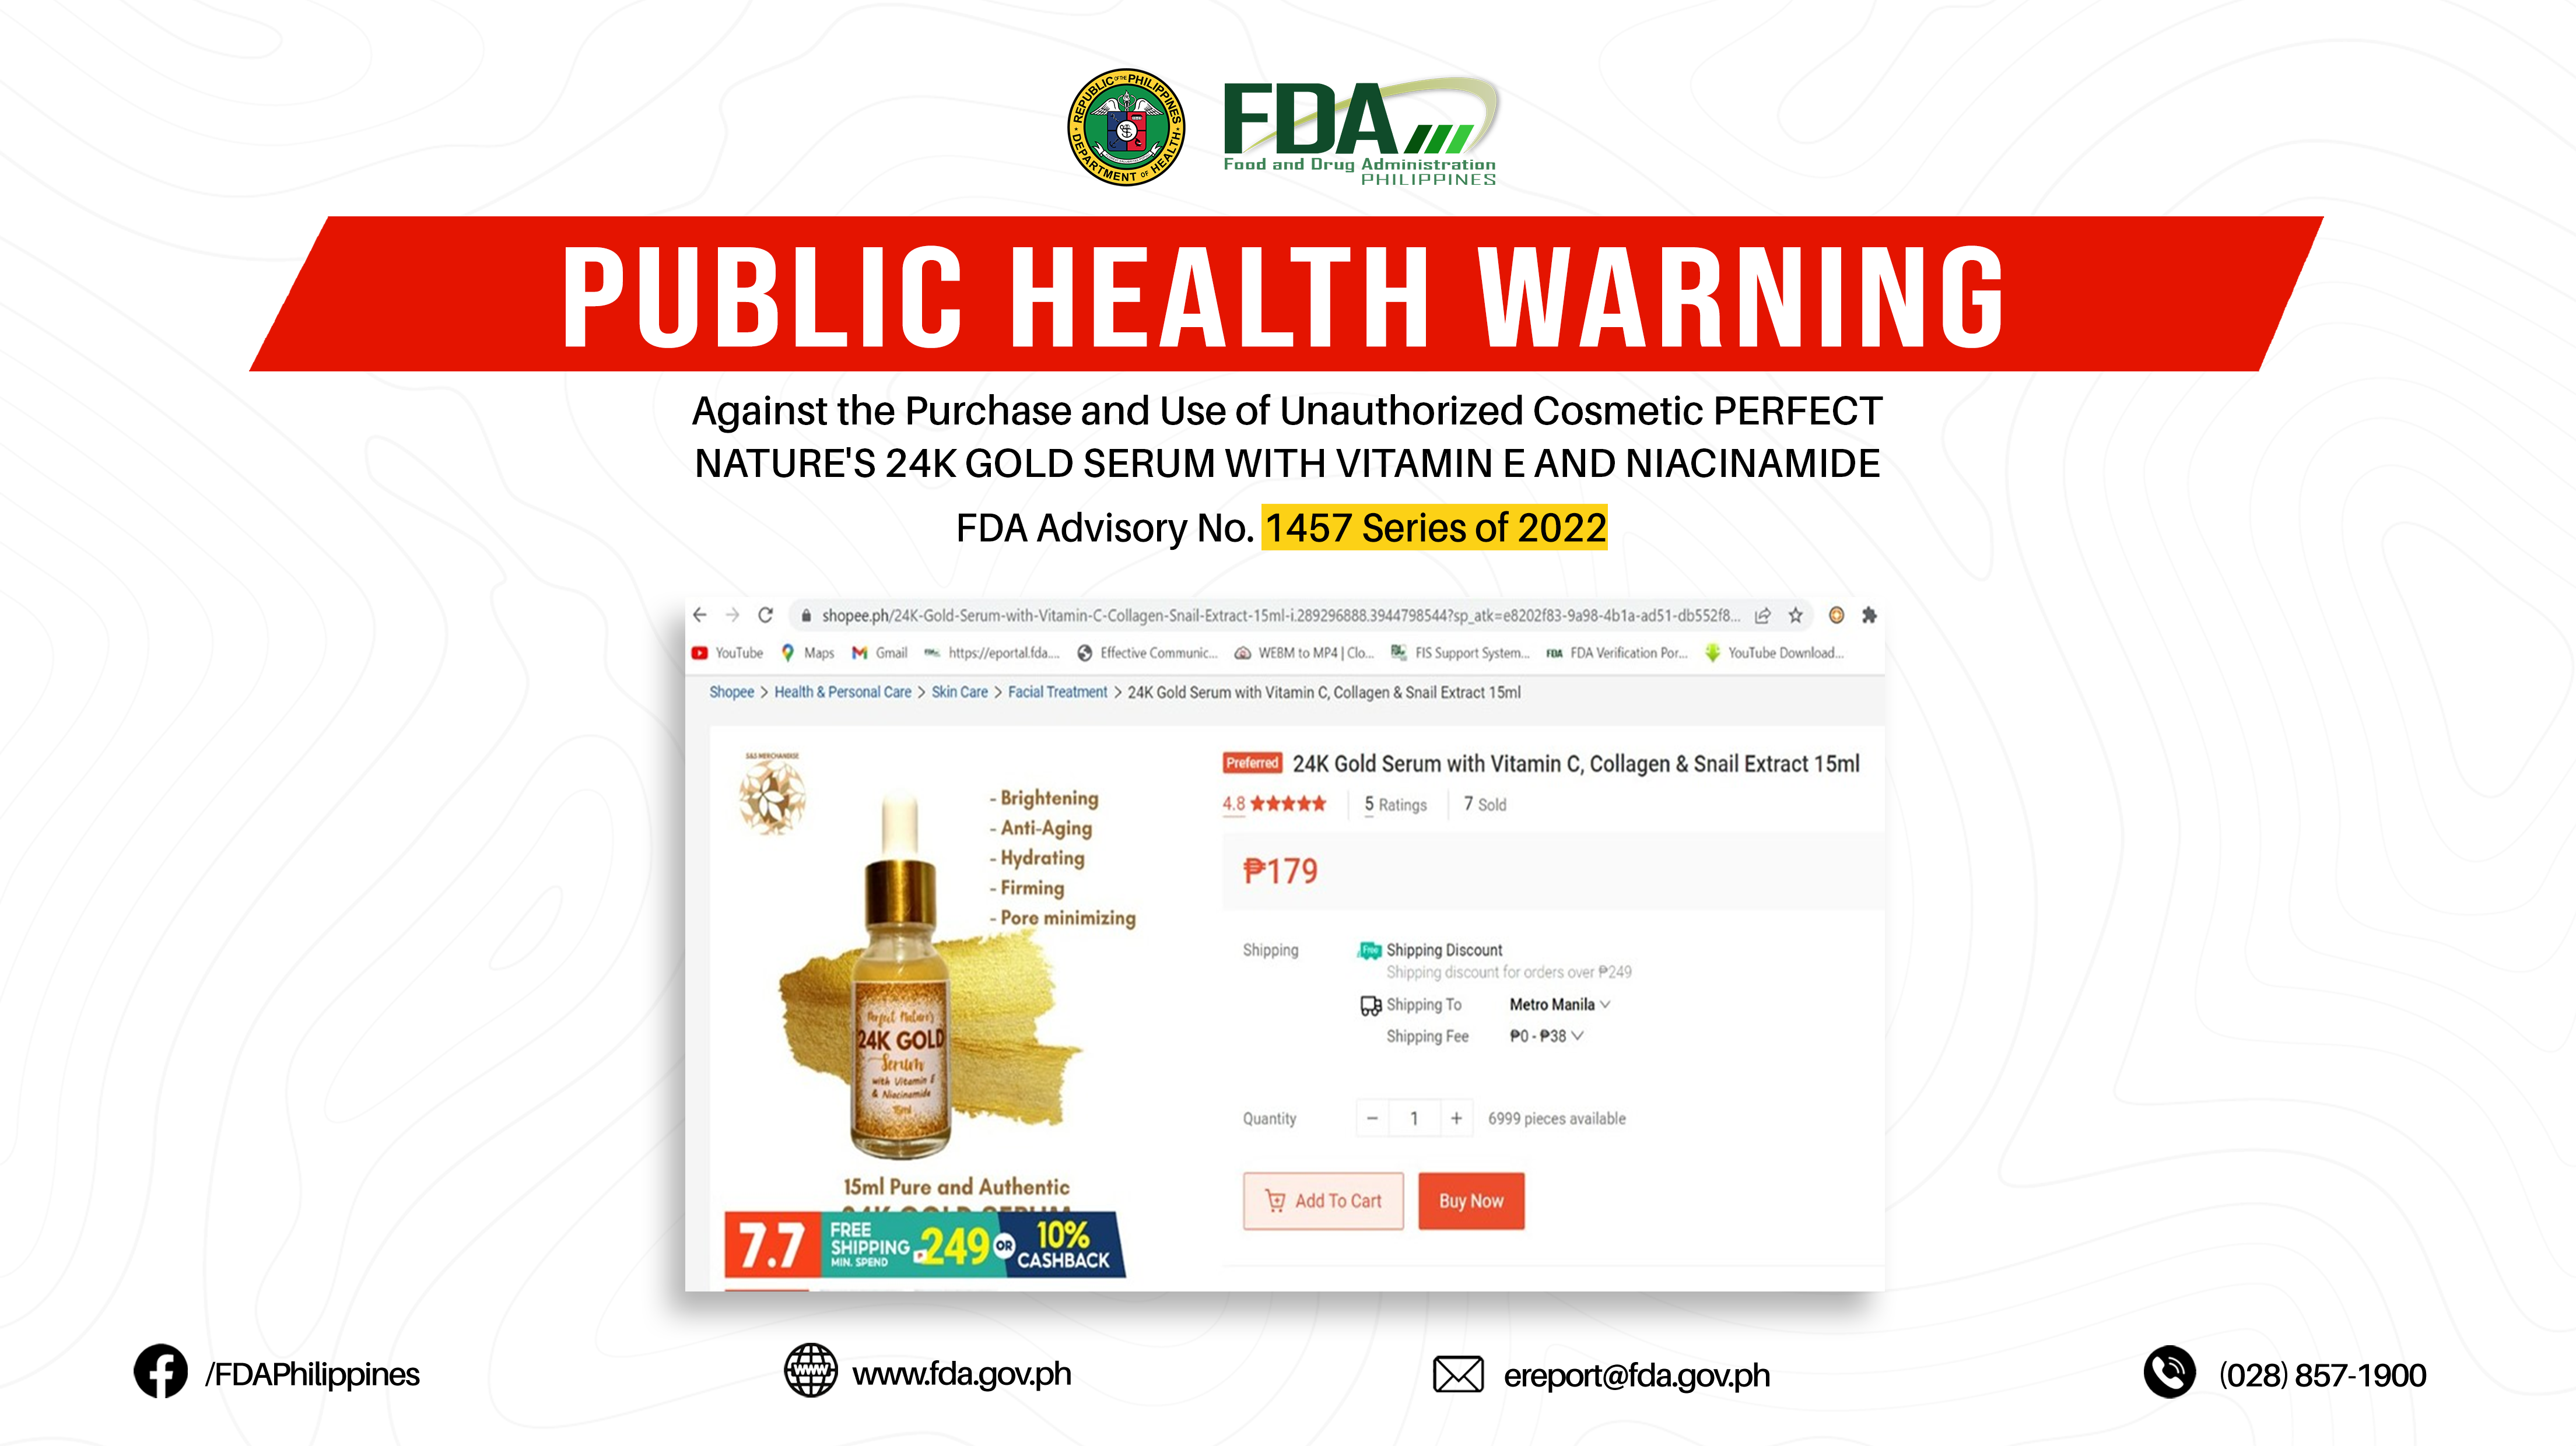 FDA Advisory No.2022-1457 || Public Health Warning Against the Purchase and Use of Unauthorized Cosmetic PERFECT NATURE’S 24K GOLD SERUM WITH VITAMIN E AND NIACINAMIDE